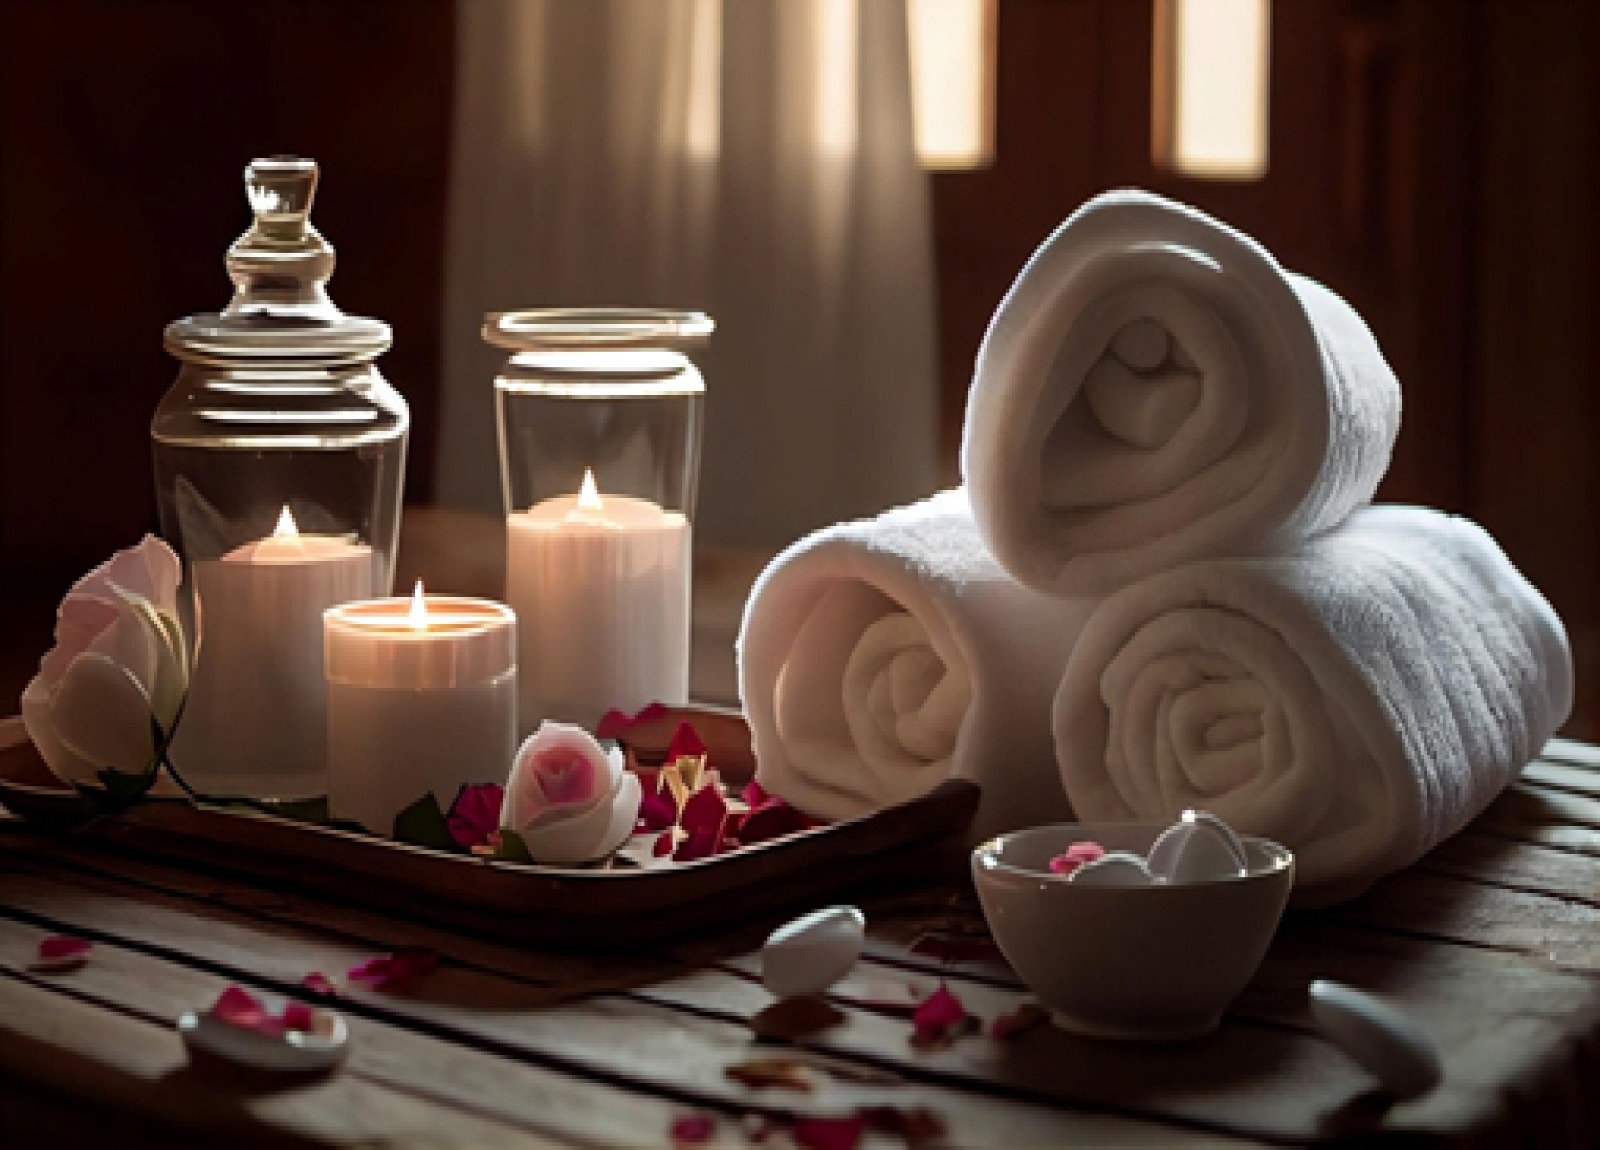 Spa's ambiance: a tranquil escape to pure relaxation and rejuvenation